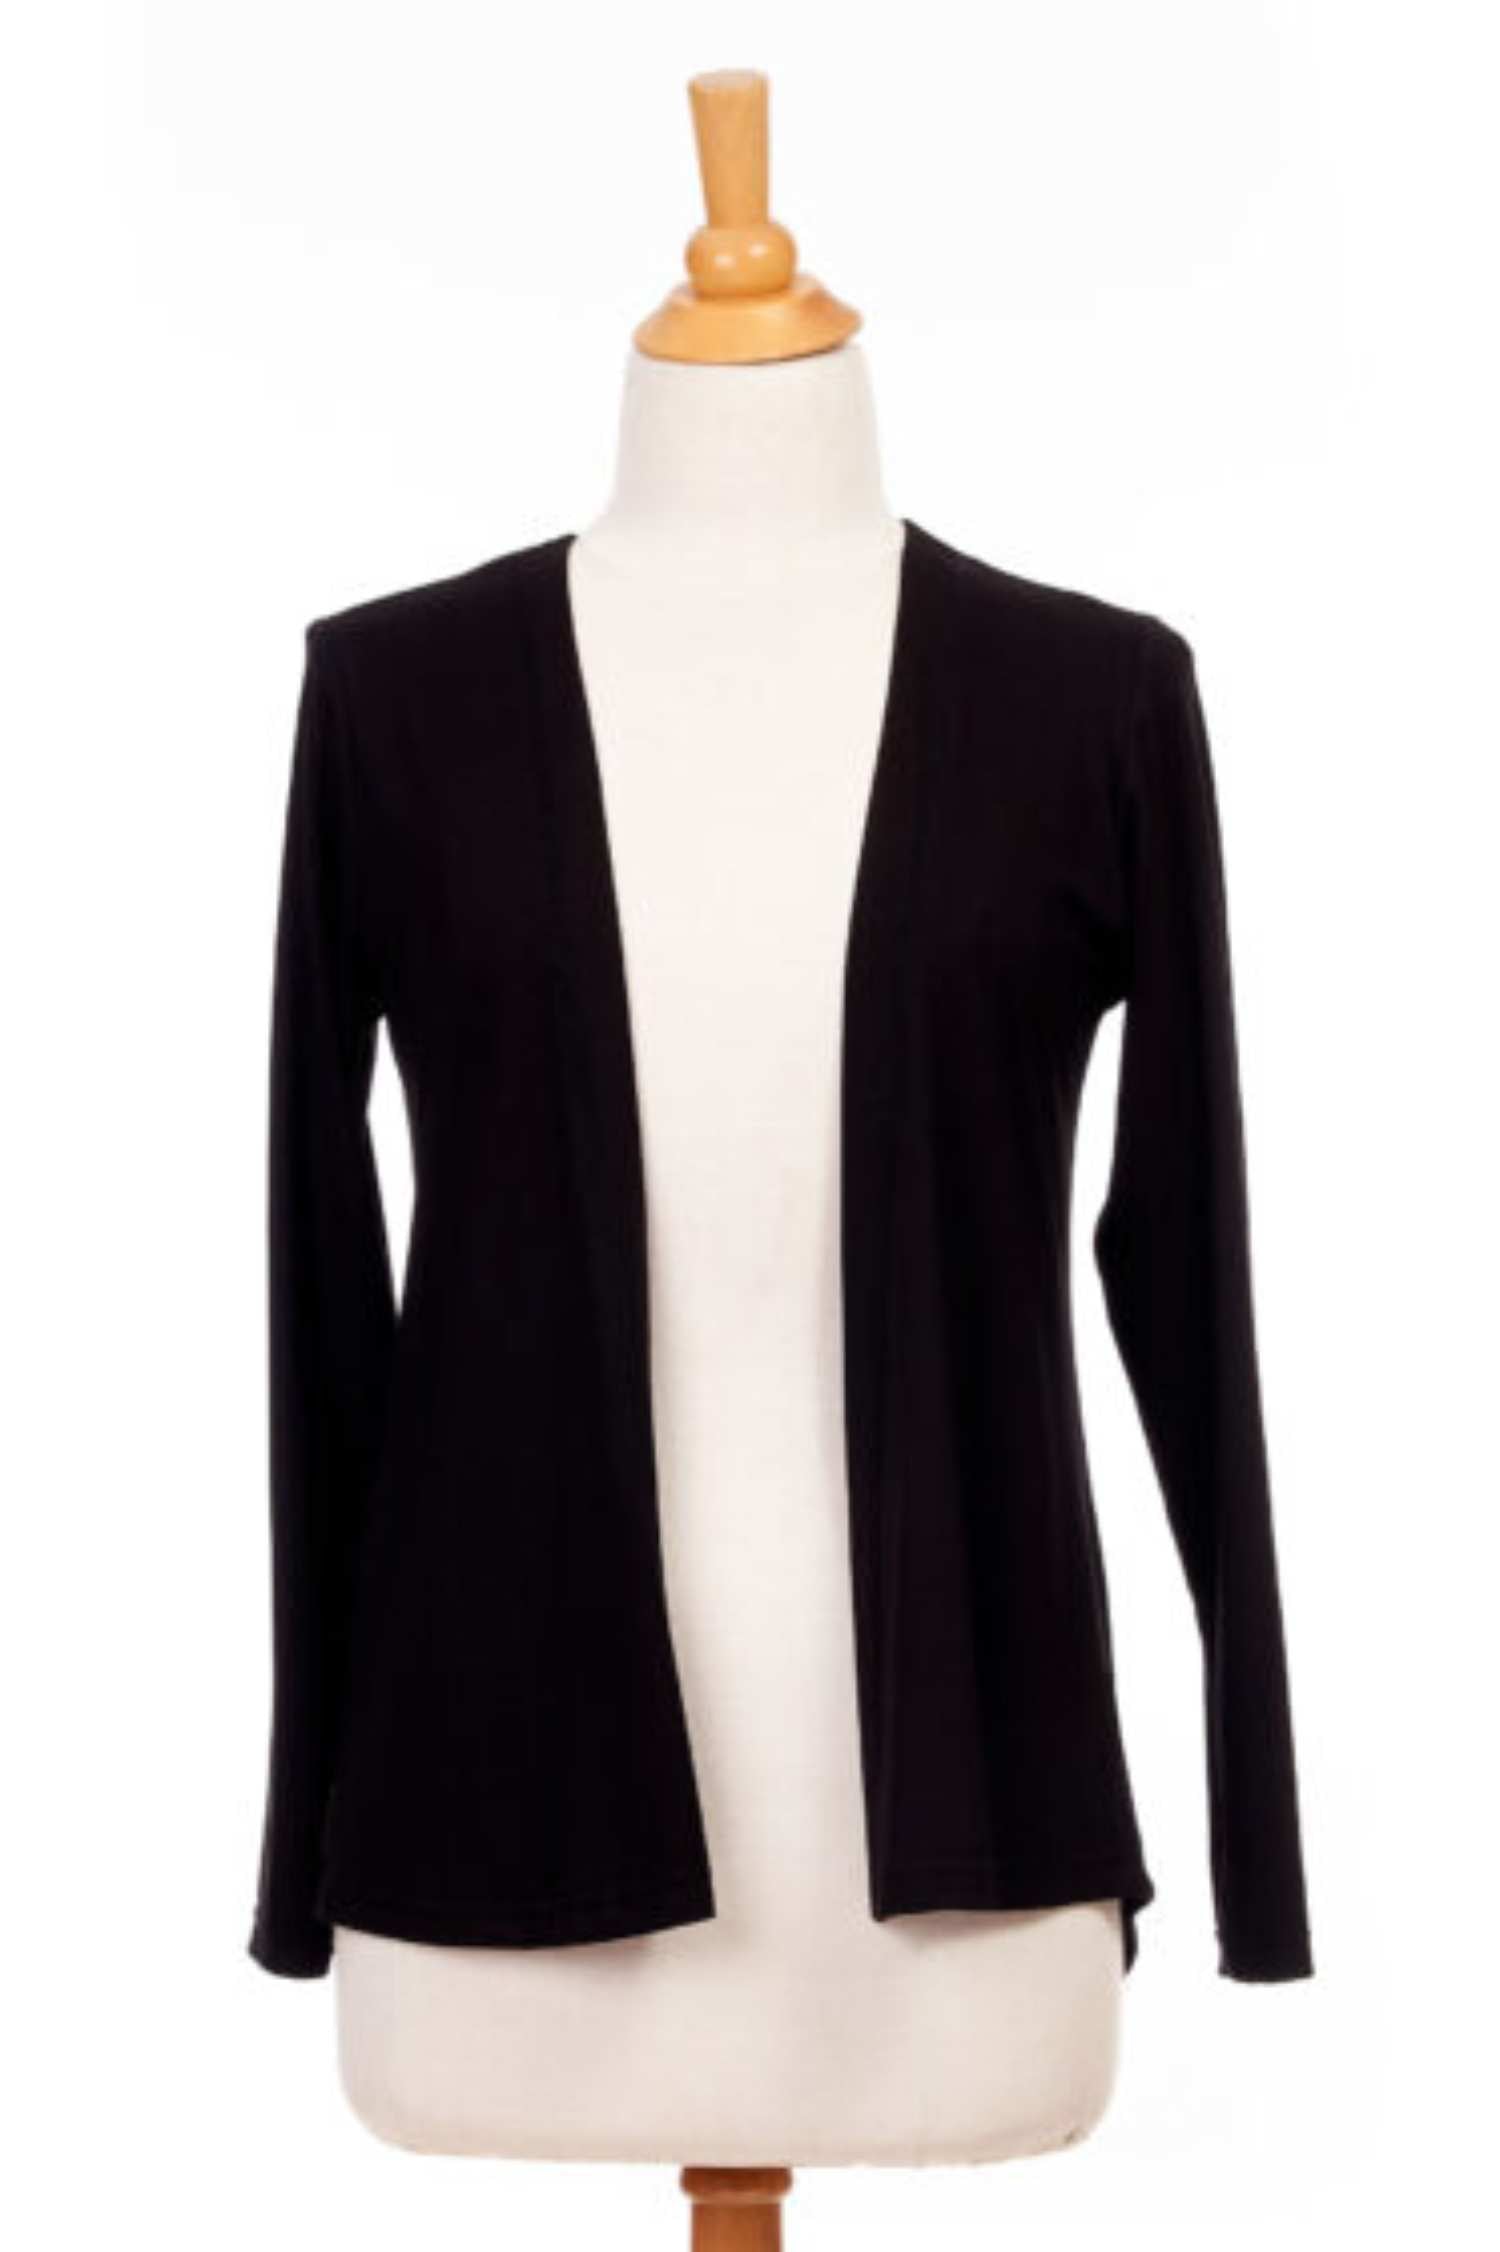 Janette Cardigan by Rien ne se Perd, Black, open cardigan, viscose, side pocket, sizes XS to XXL, made in Quebec